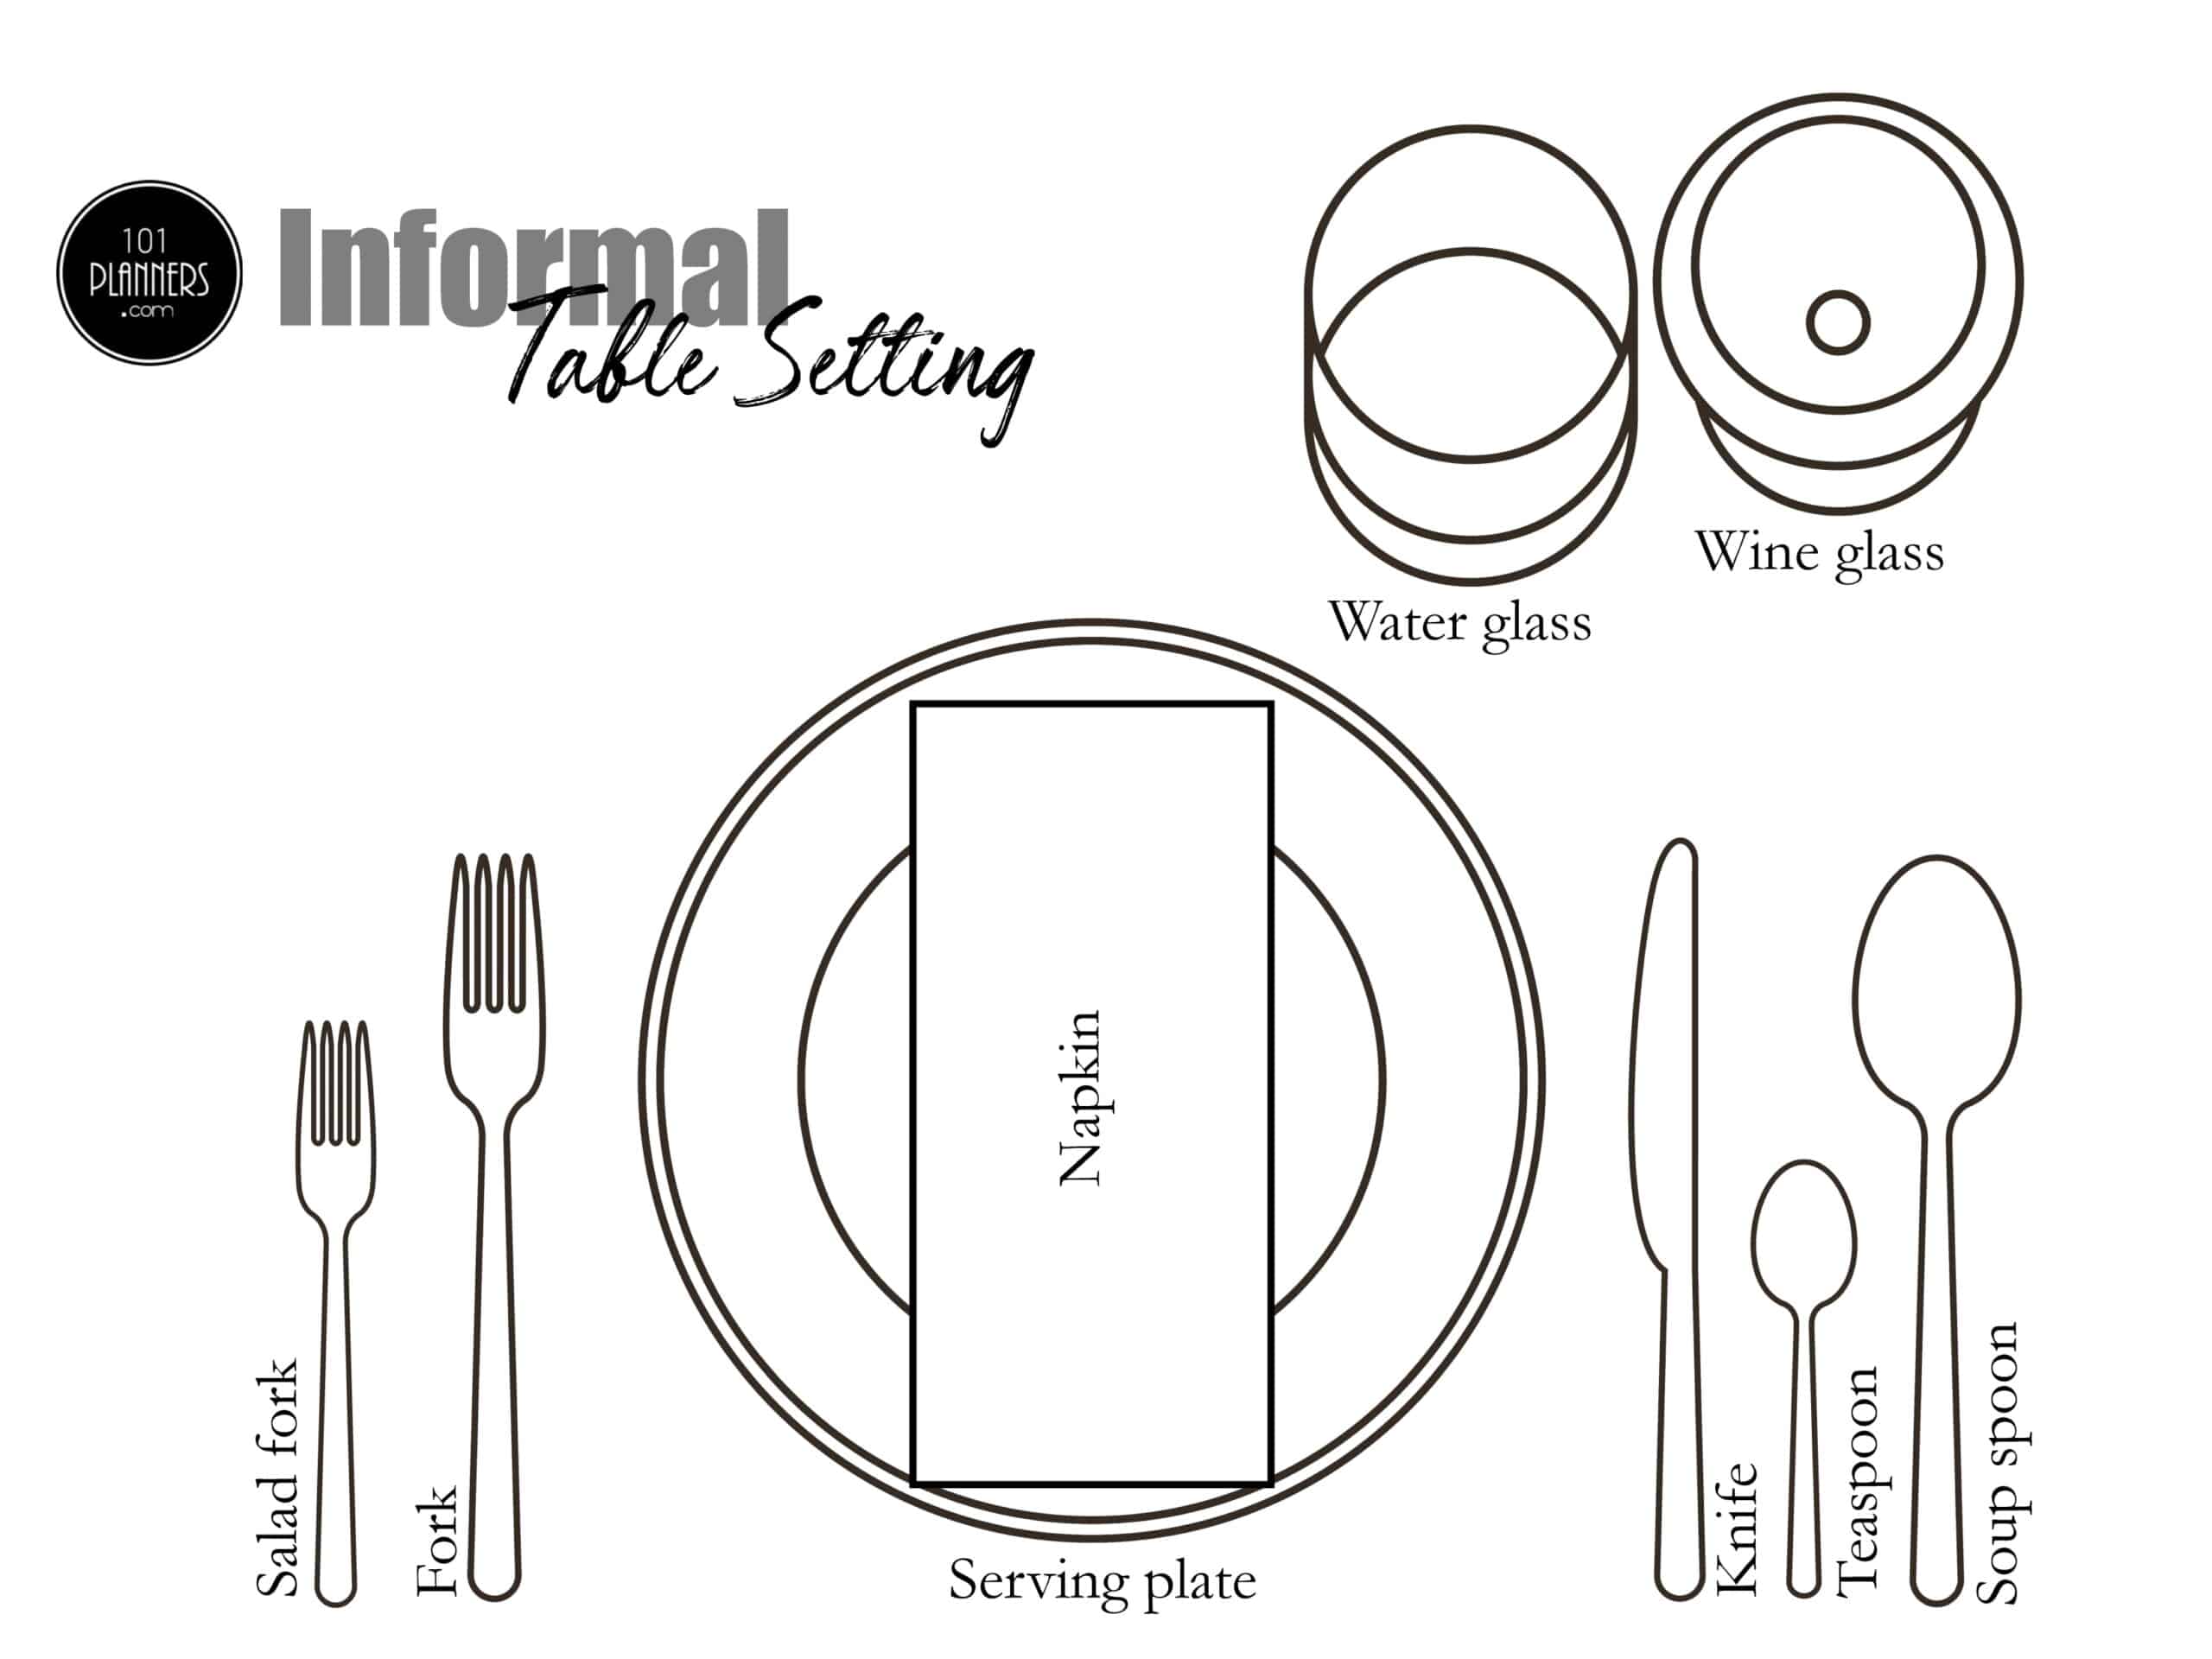 How to Set a Table With 5 Place Setting Templates for Every Event